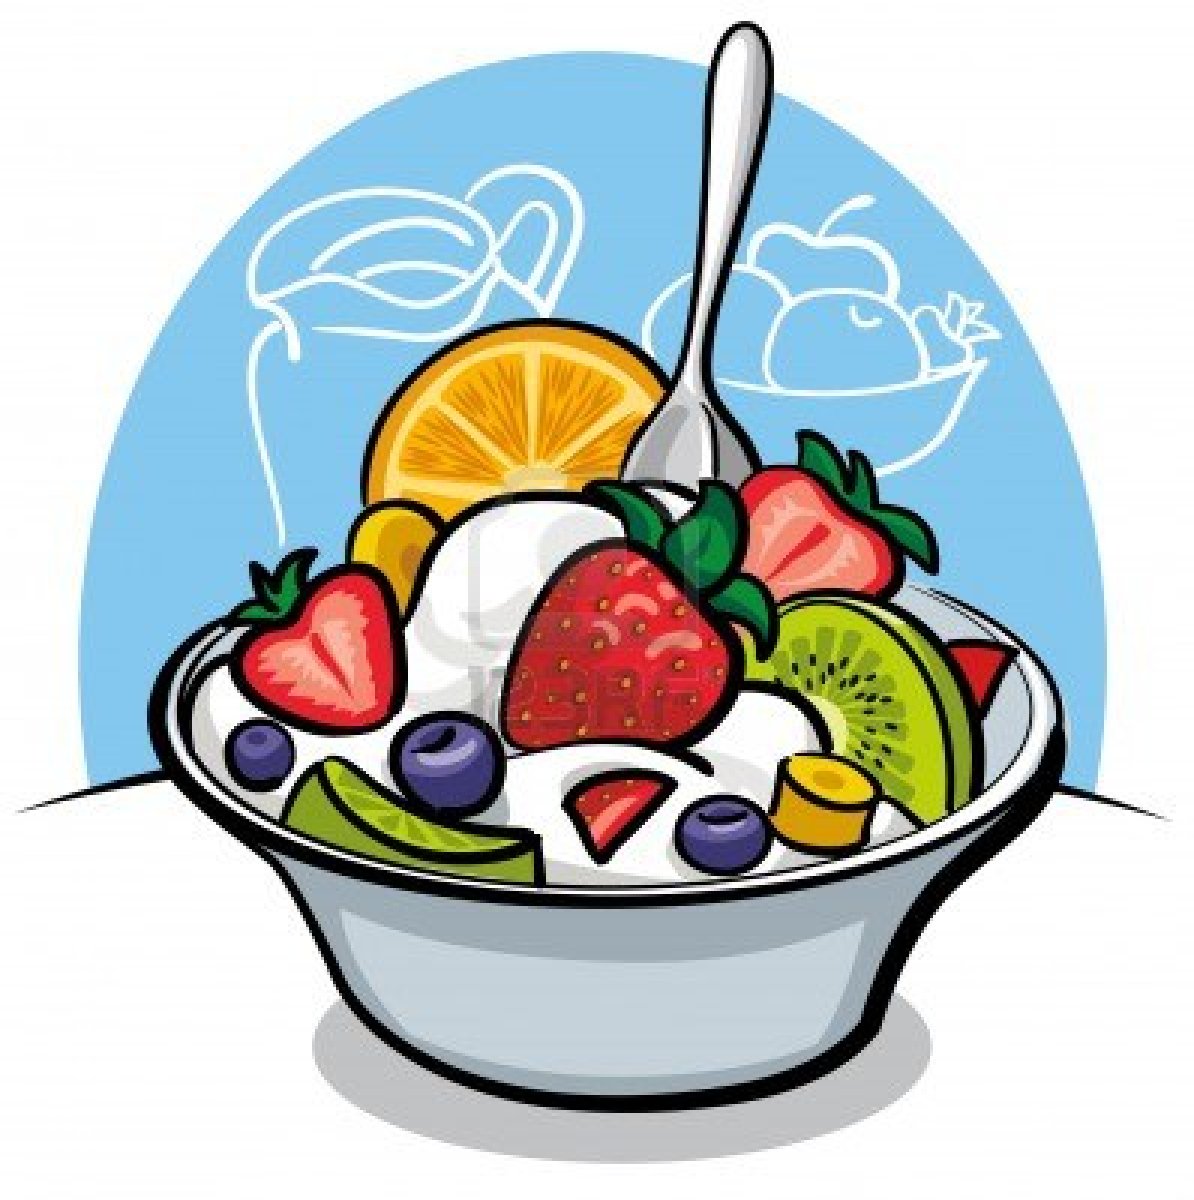     Salad Clipart Black And White   Clipart Panda   Free Clipart Images